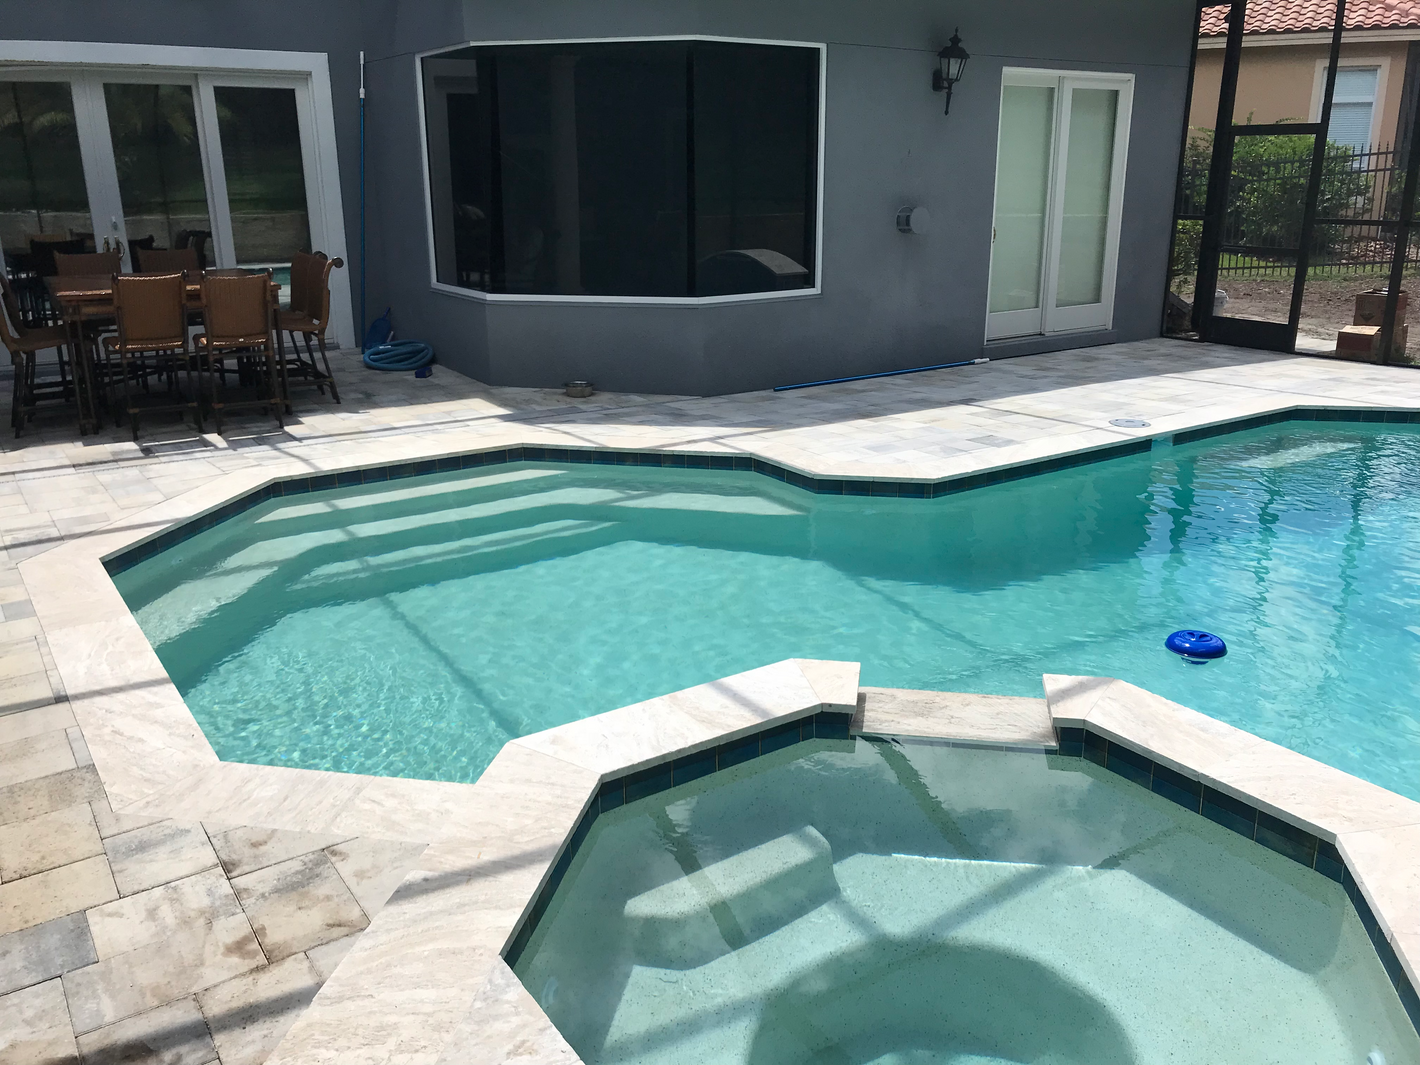 Travertine and paver pool deck, coping, and spa